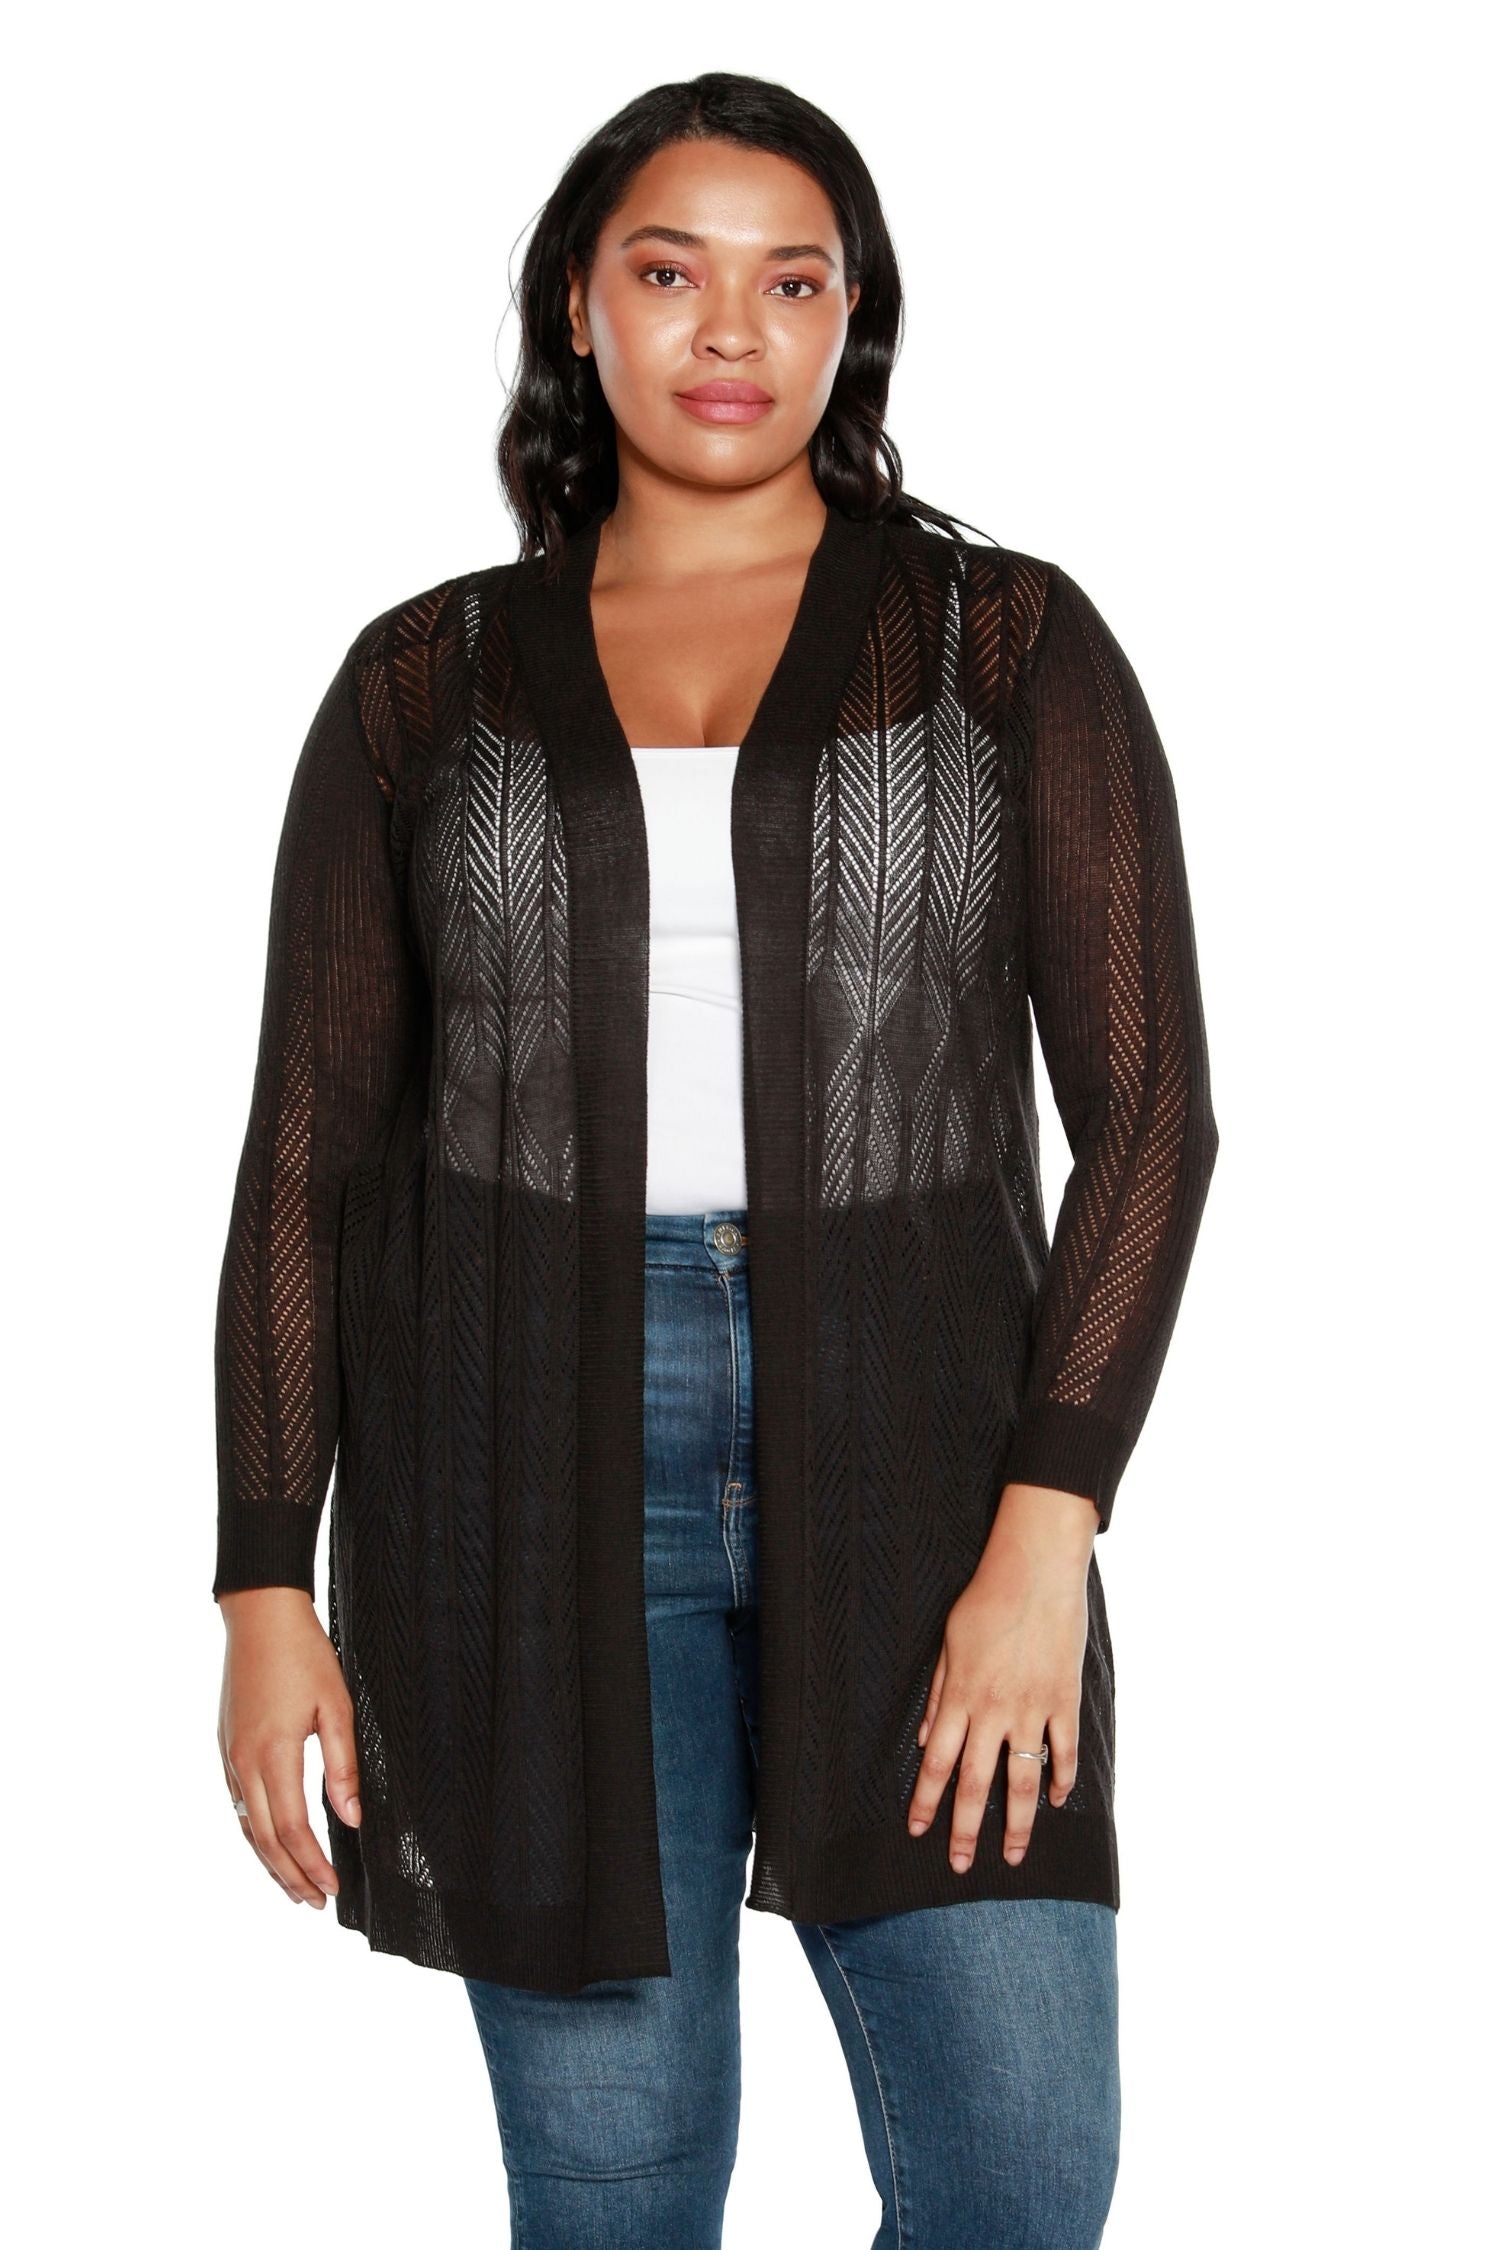 Women’s Sheer Long Cardigan with Crochet Chevron Stripes and Pointelle Stitch | Curvy